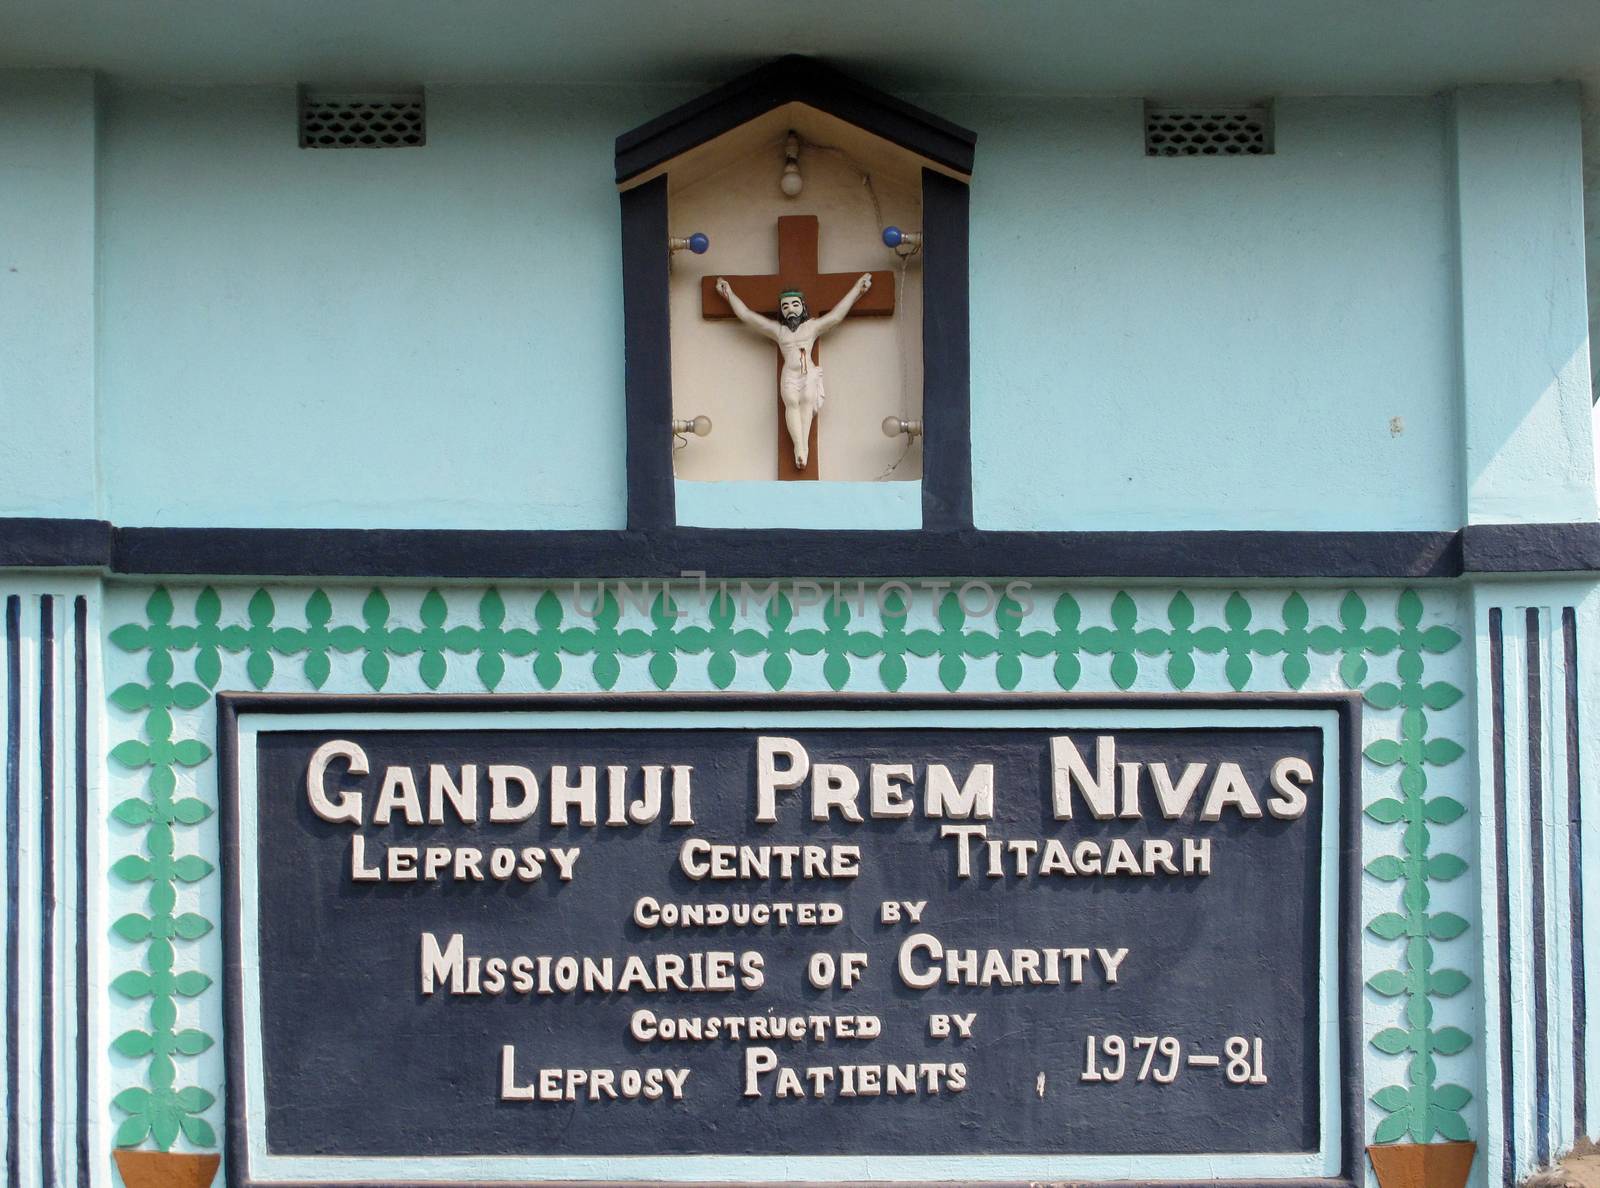 The inscription at the entrance to Gandhiji Prem Nivas( Leprosy centre), one of the houses established by Mother Teresa and run by the Missionaries of Charity in Titagarh, India